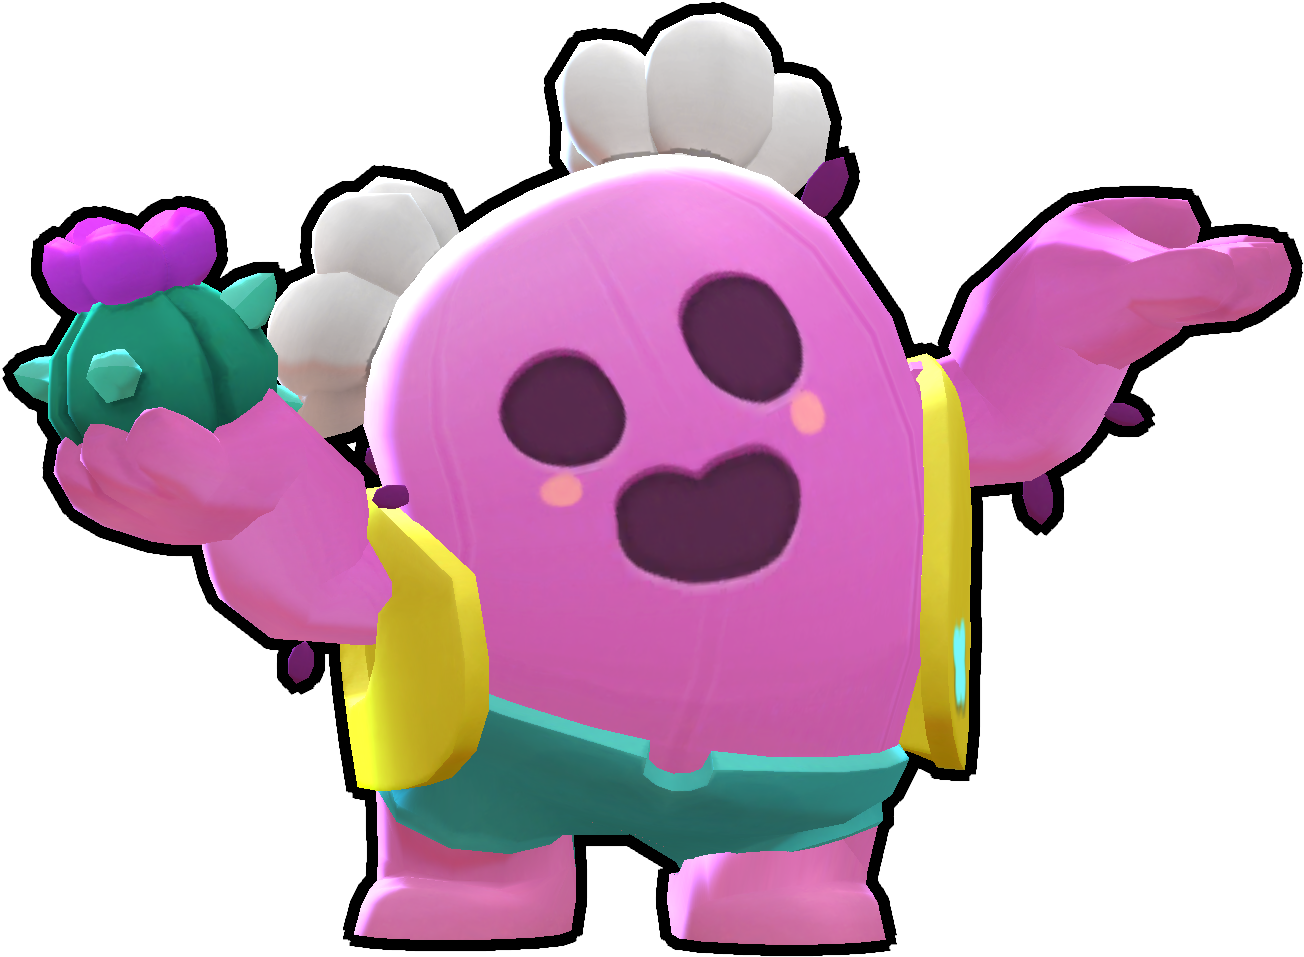 Download Spike Skin Pinky Spike Brawl Stars Png Image With No Background Pngkey Com - brawlstars spike png